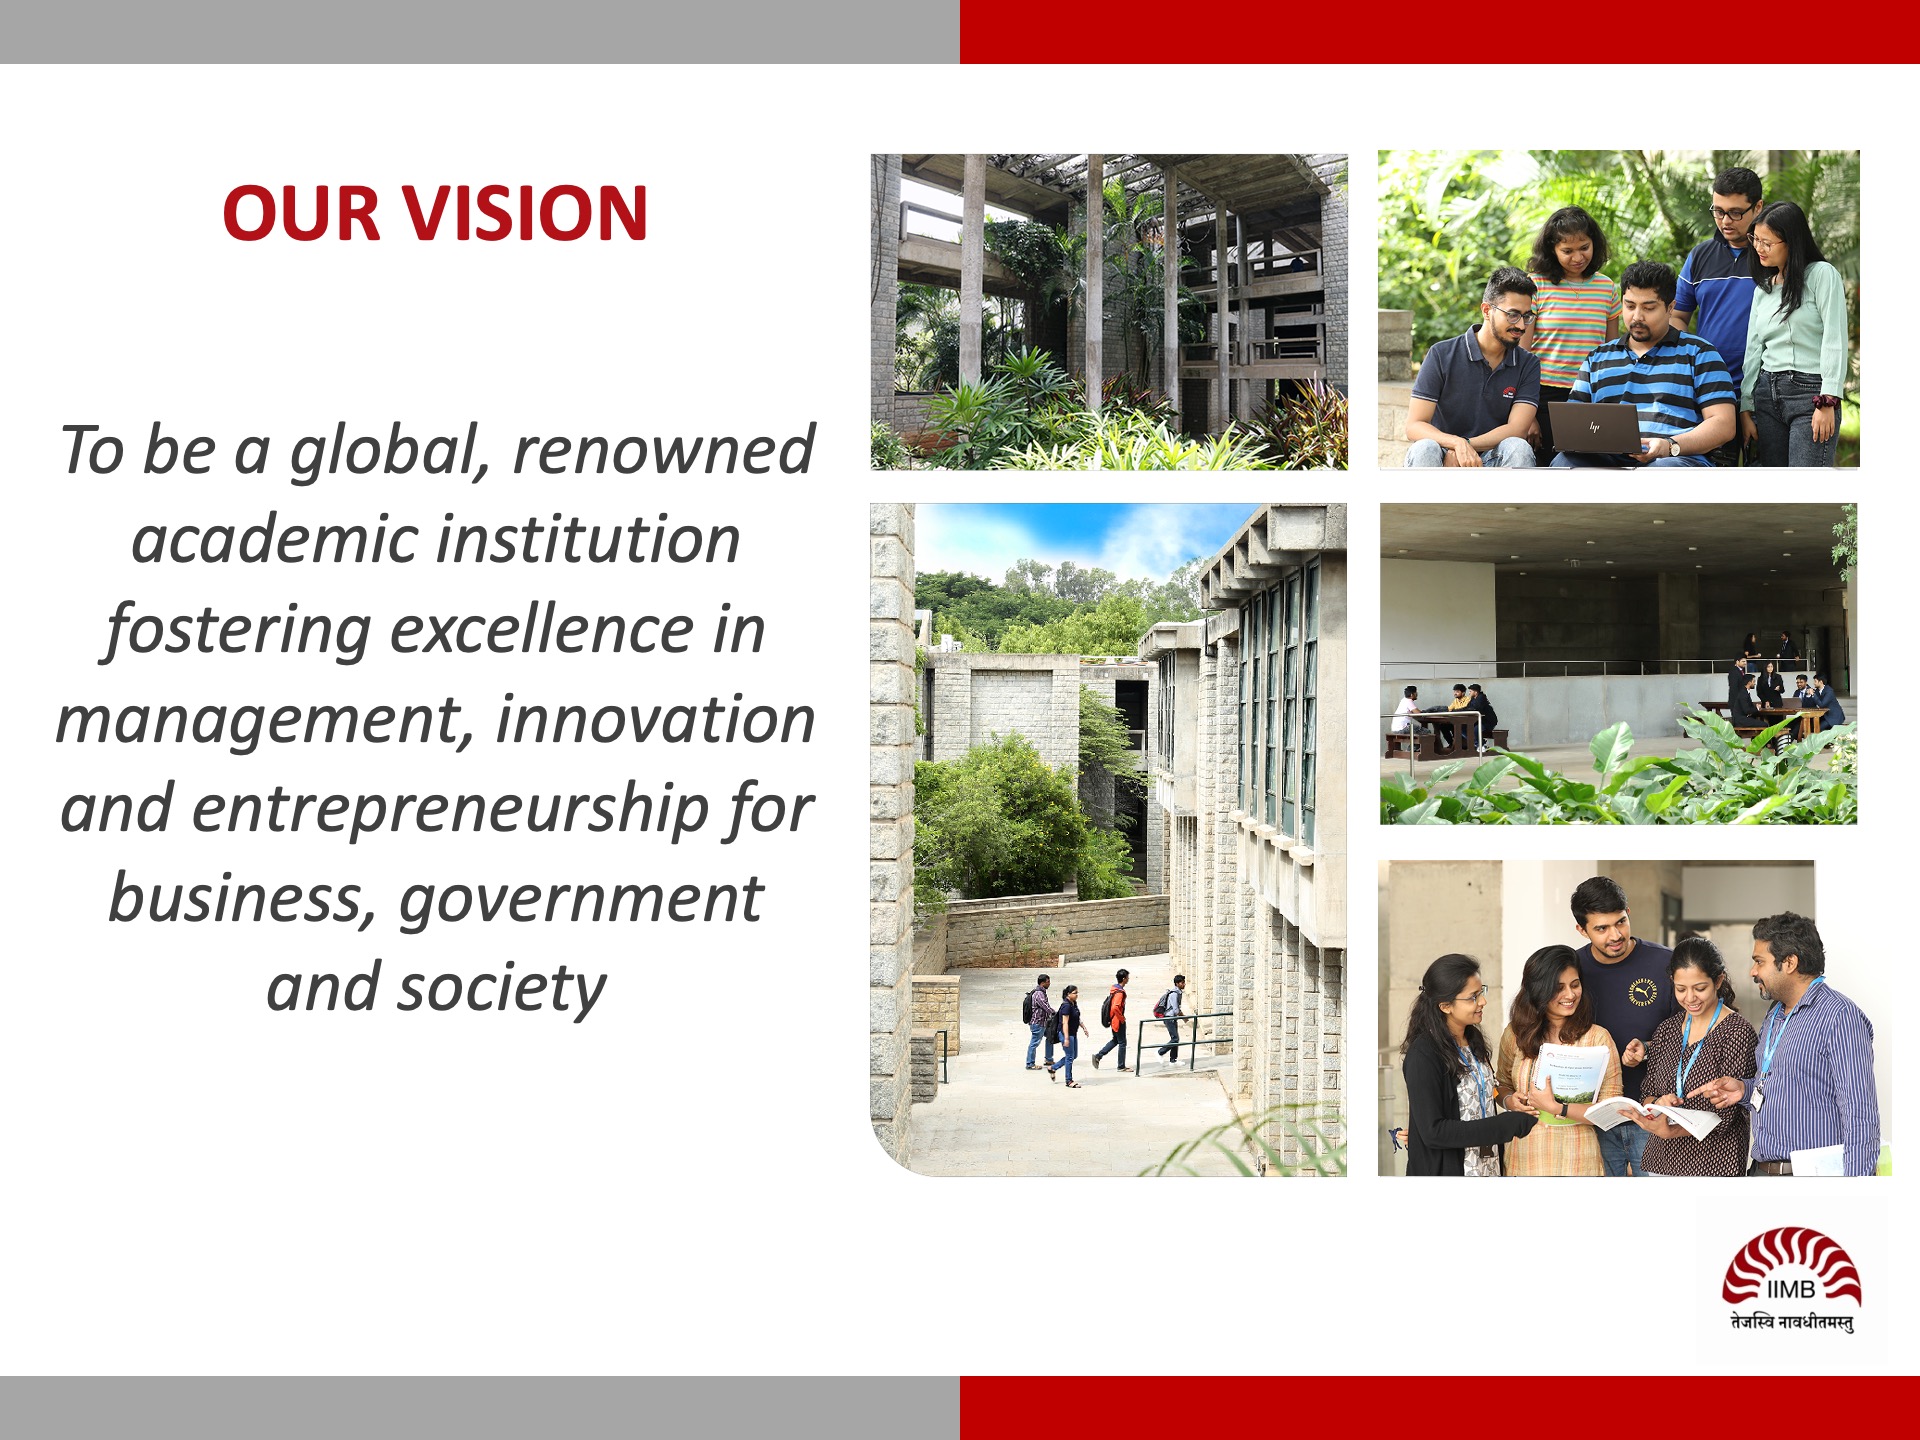 IIMB OUR VISION 